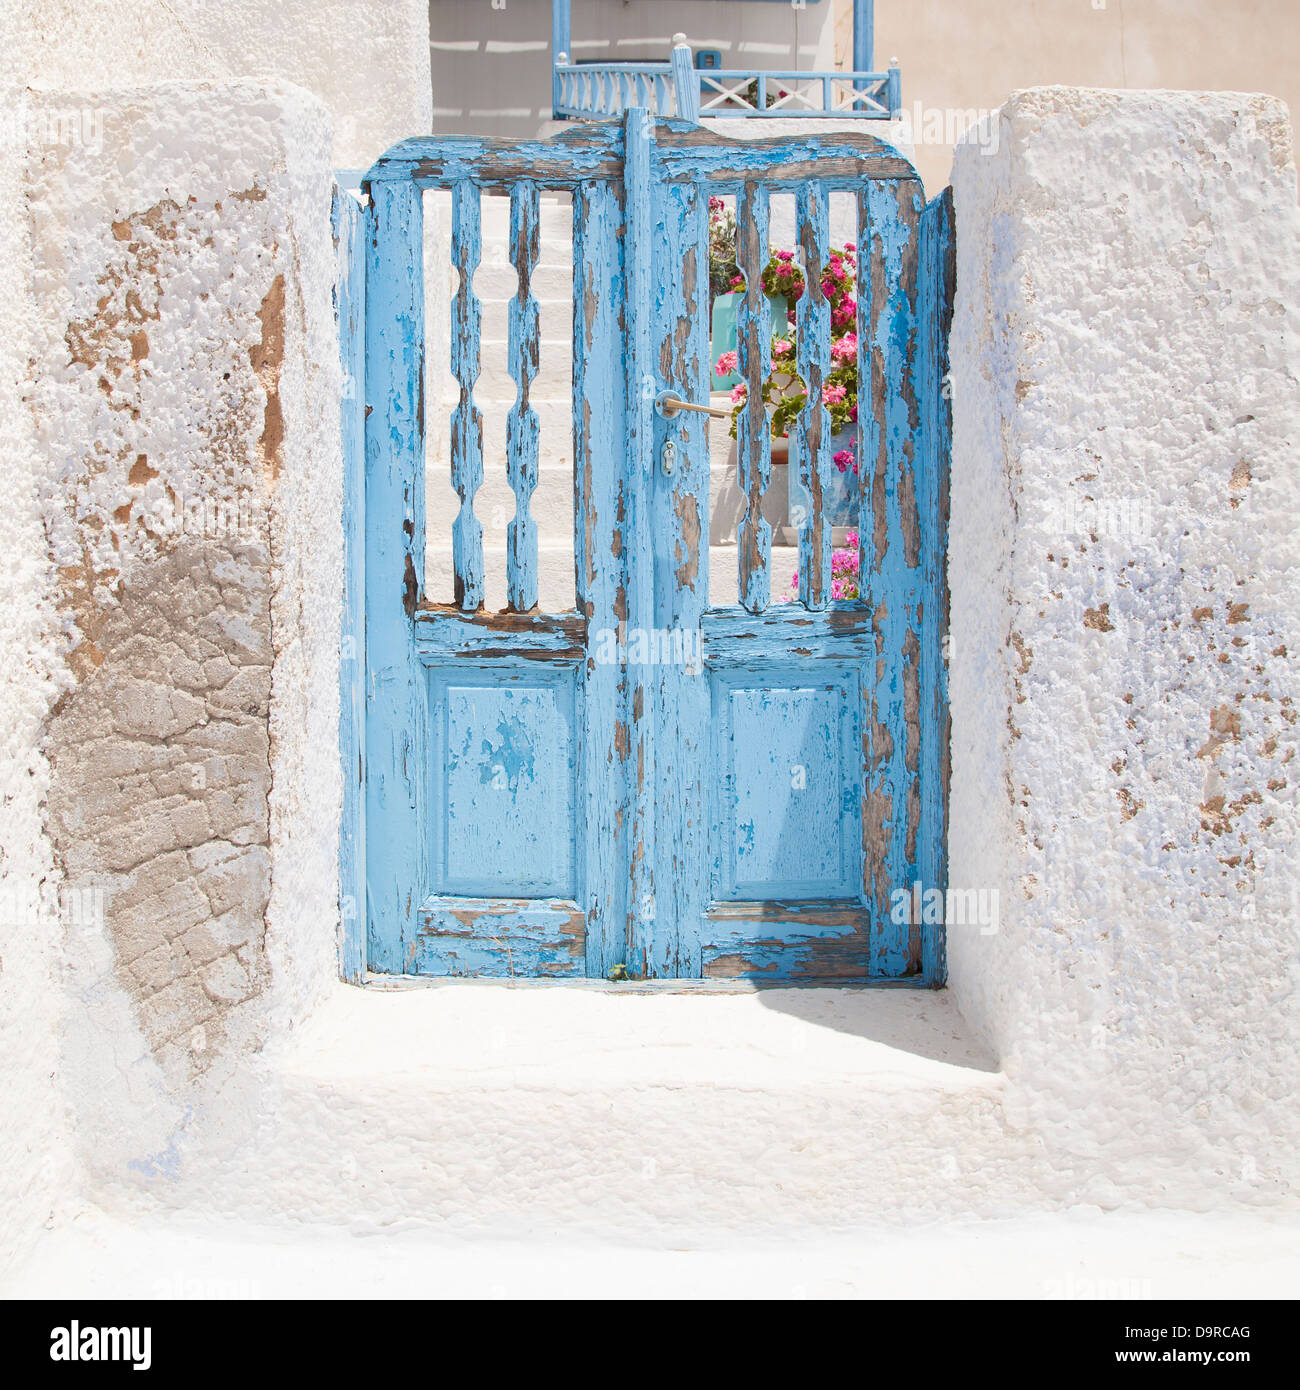 A blue gate stands as entrance to a house in Pyrgos, Santorini, Greece. Stock Photo